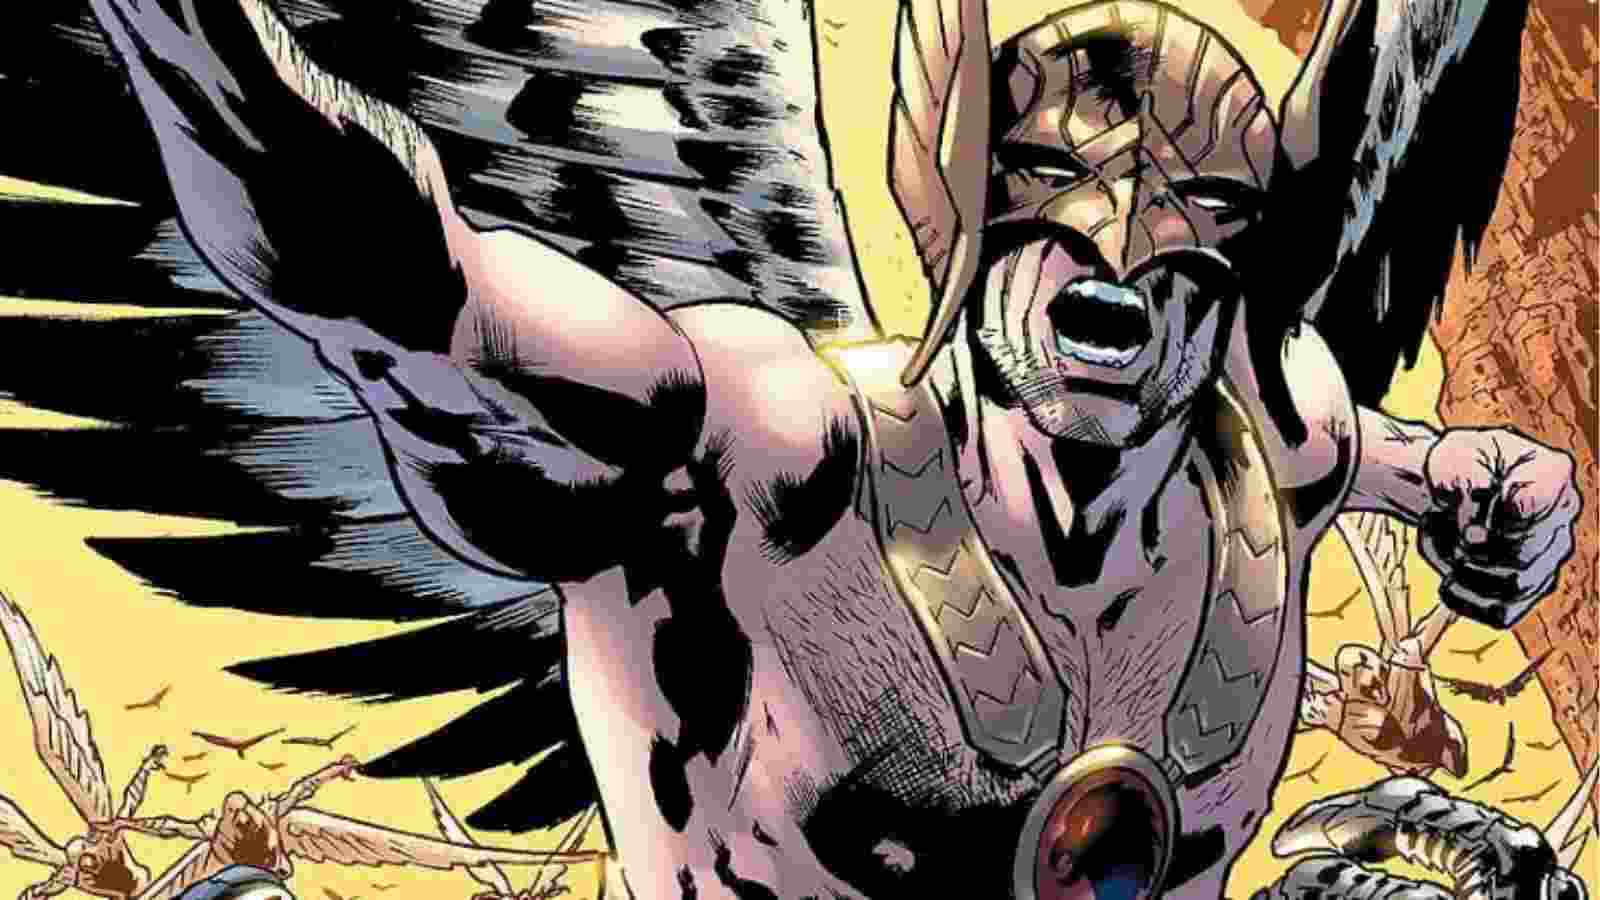 The mysterious wings of Hawkman allow him to fly at different speeds, reaching up to 300 km/hour.